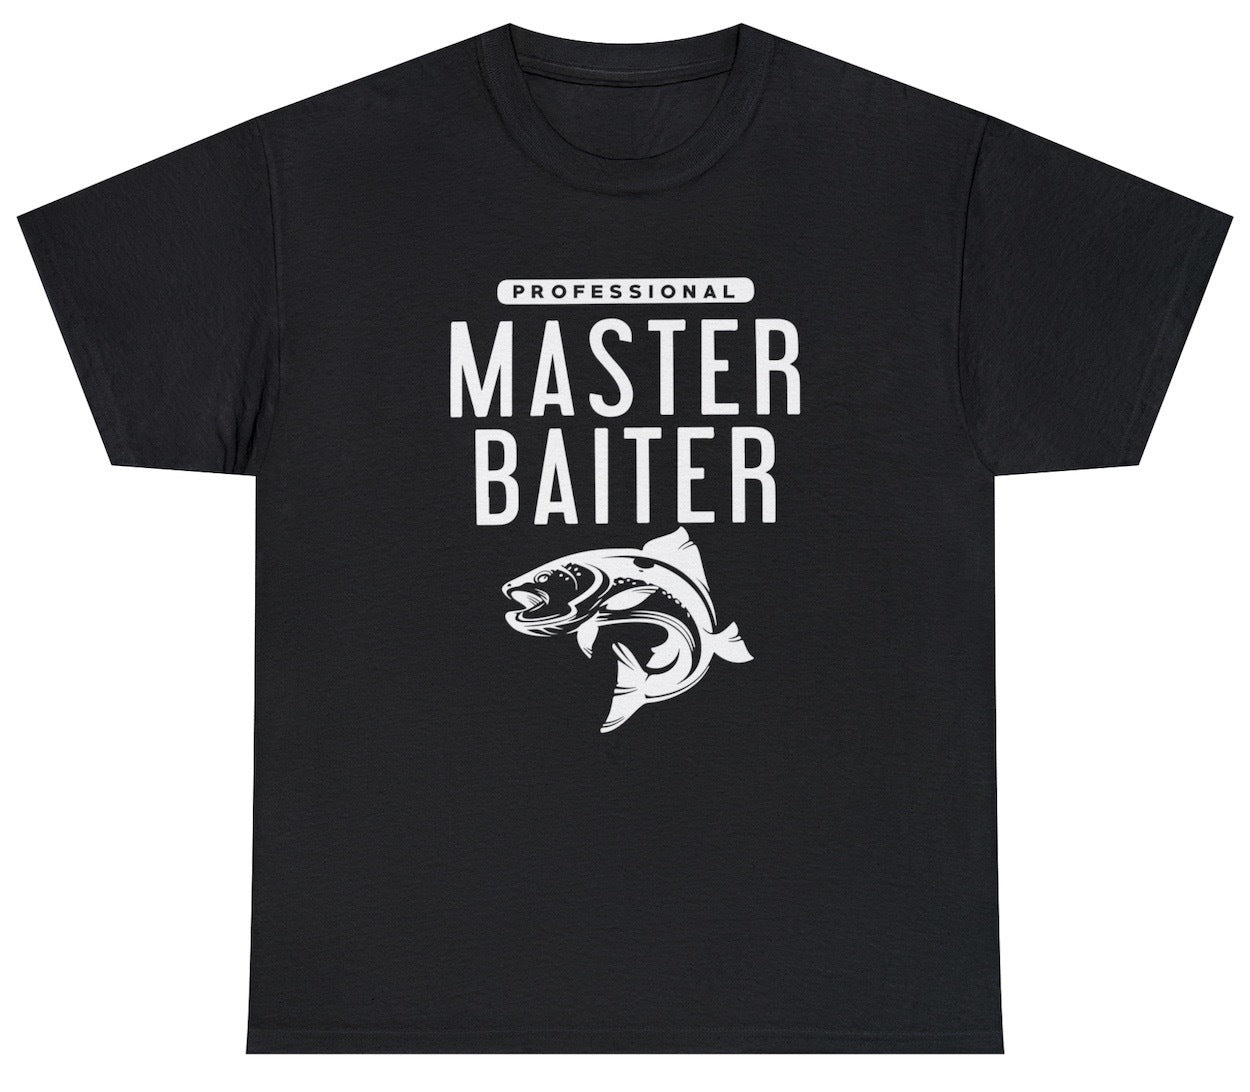 Master Baiter T Shirt Funny Inappropriate Fishing Adult Humor Gift